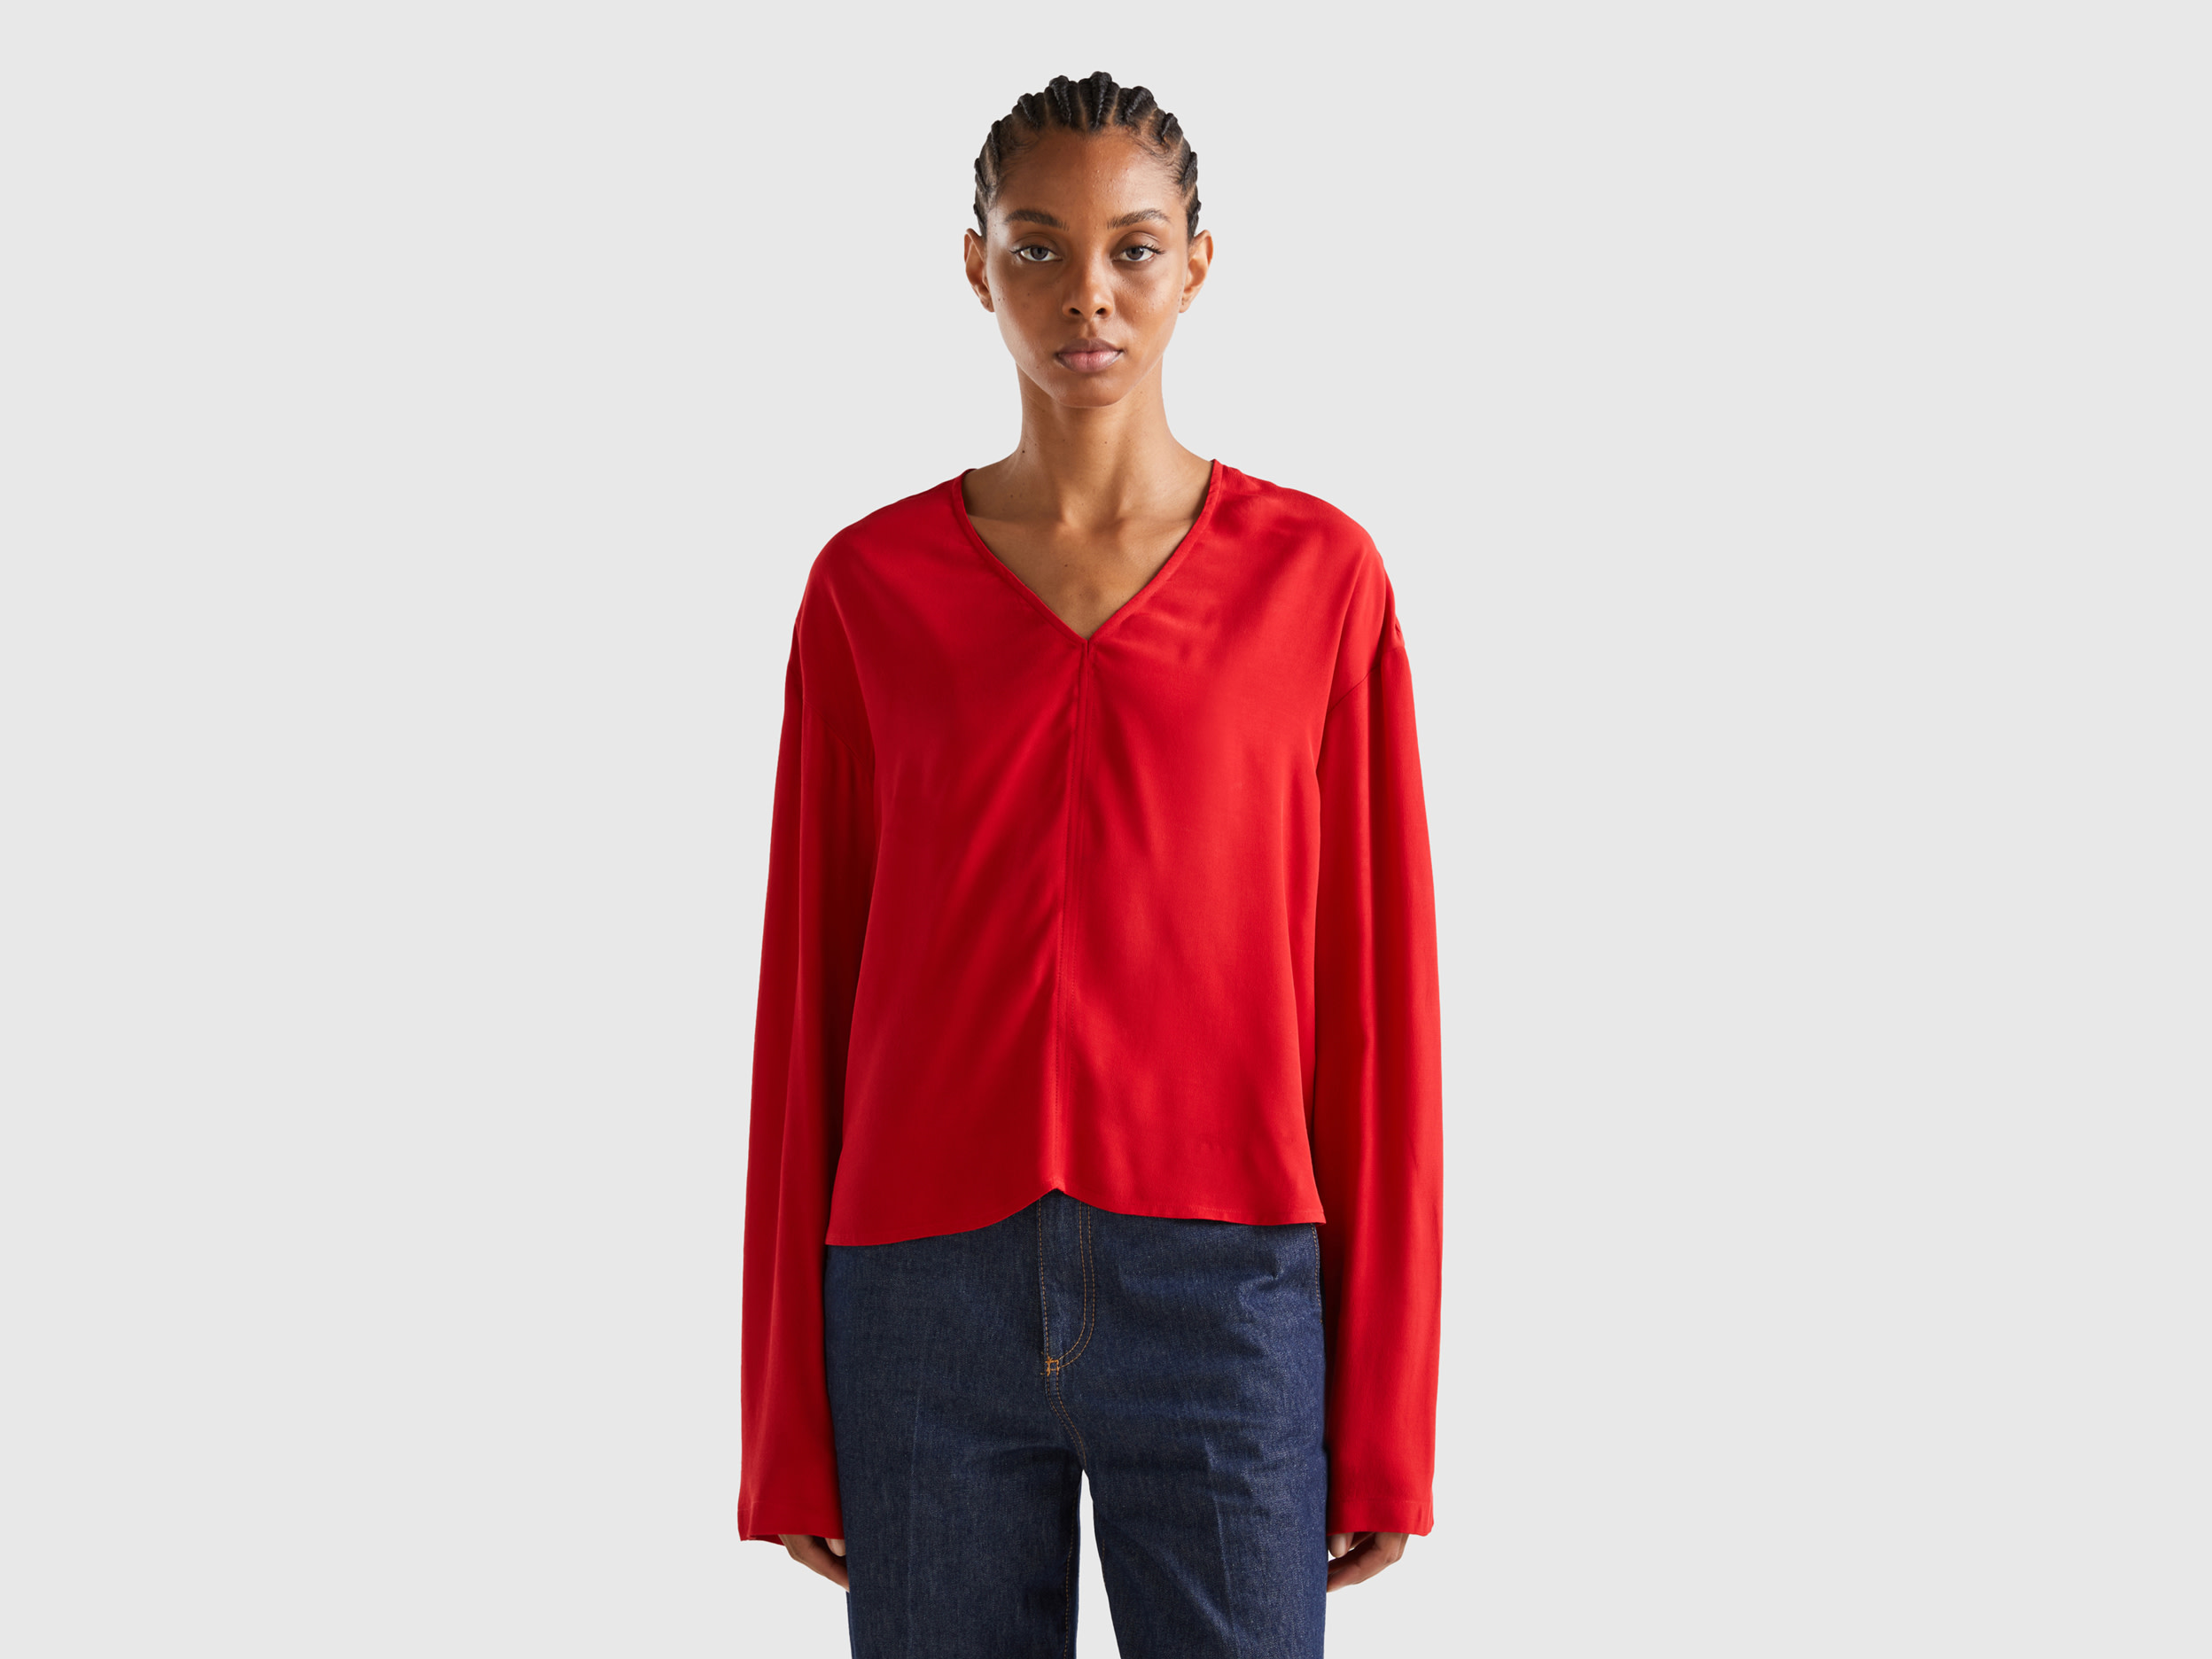 Benetton, Blouse With V-neck, size M, Red, Women